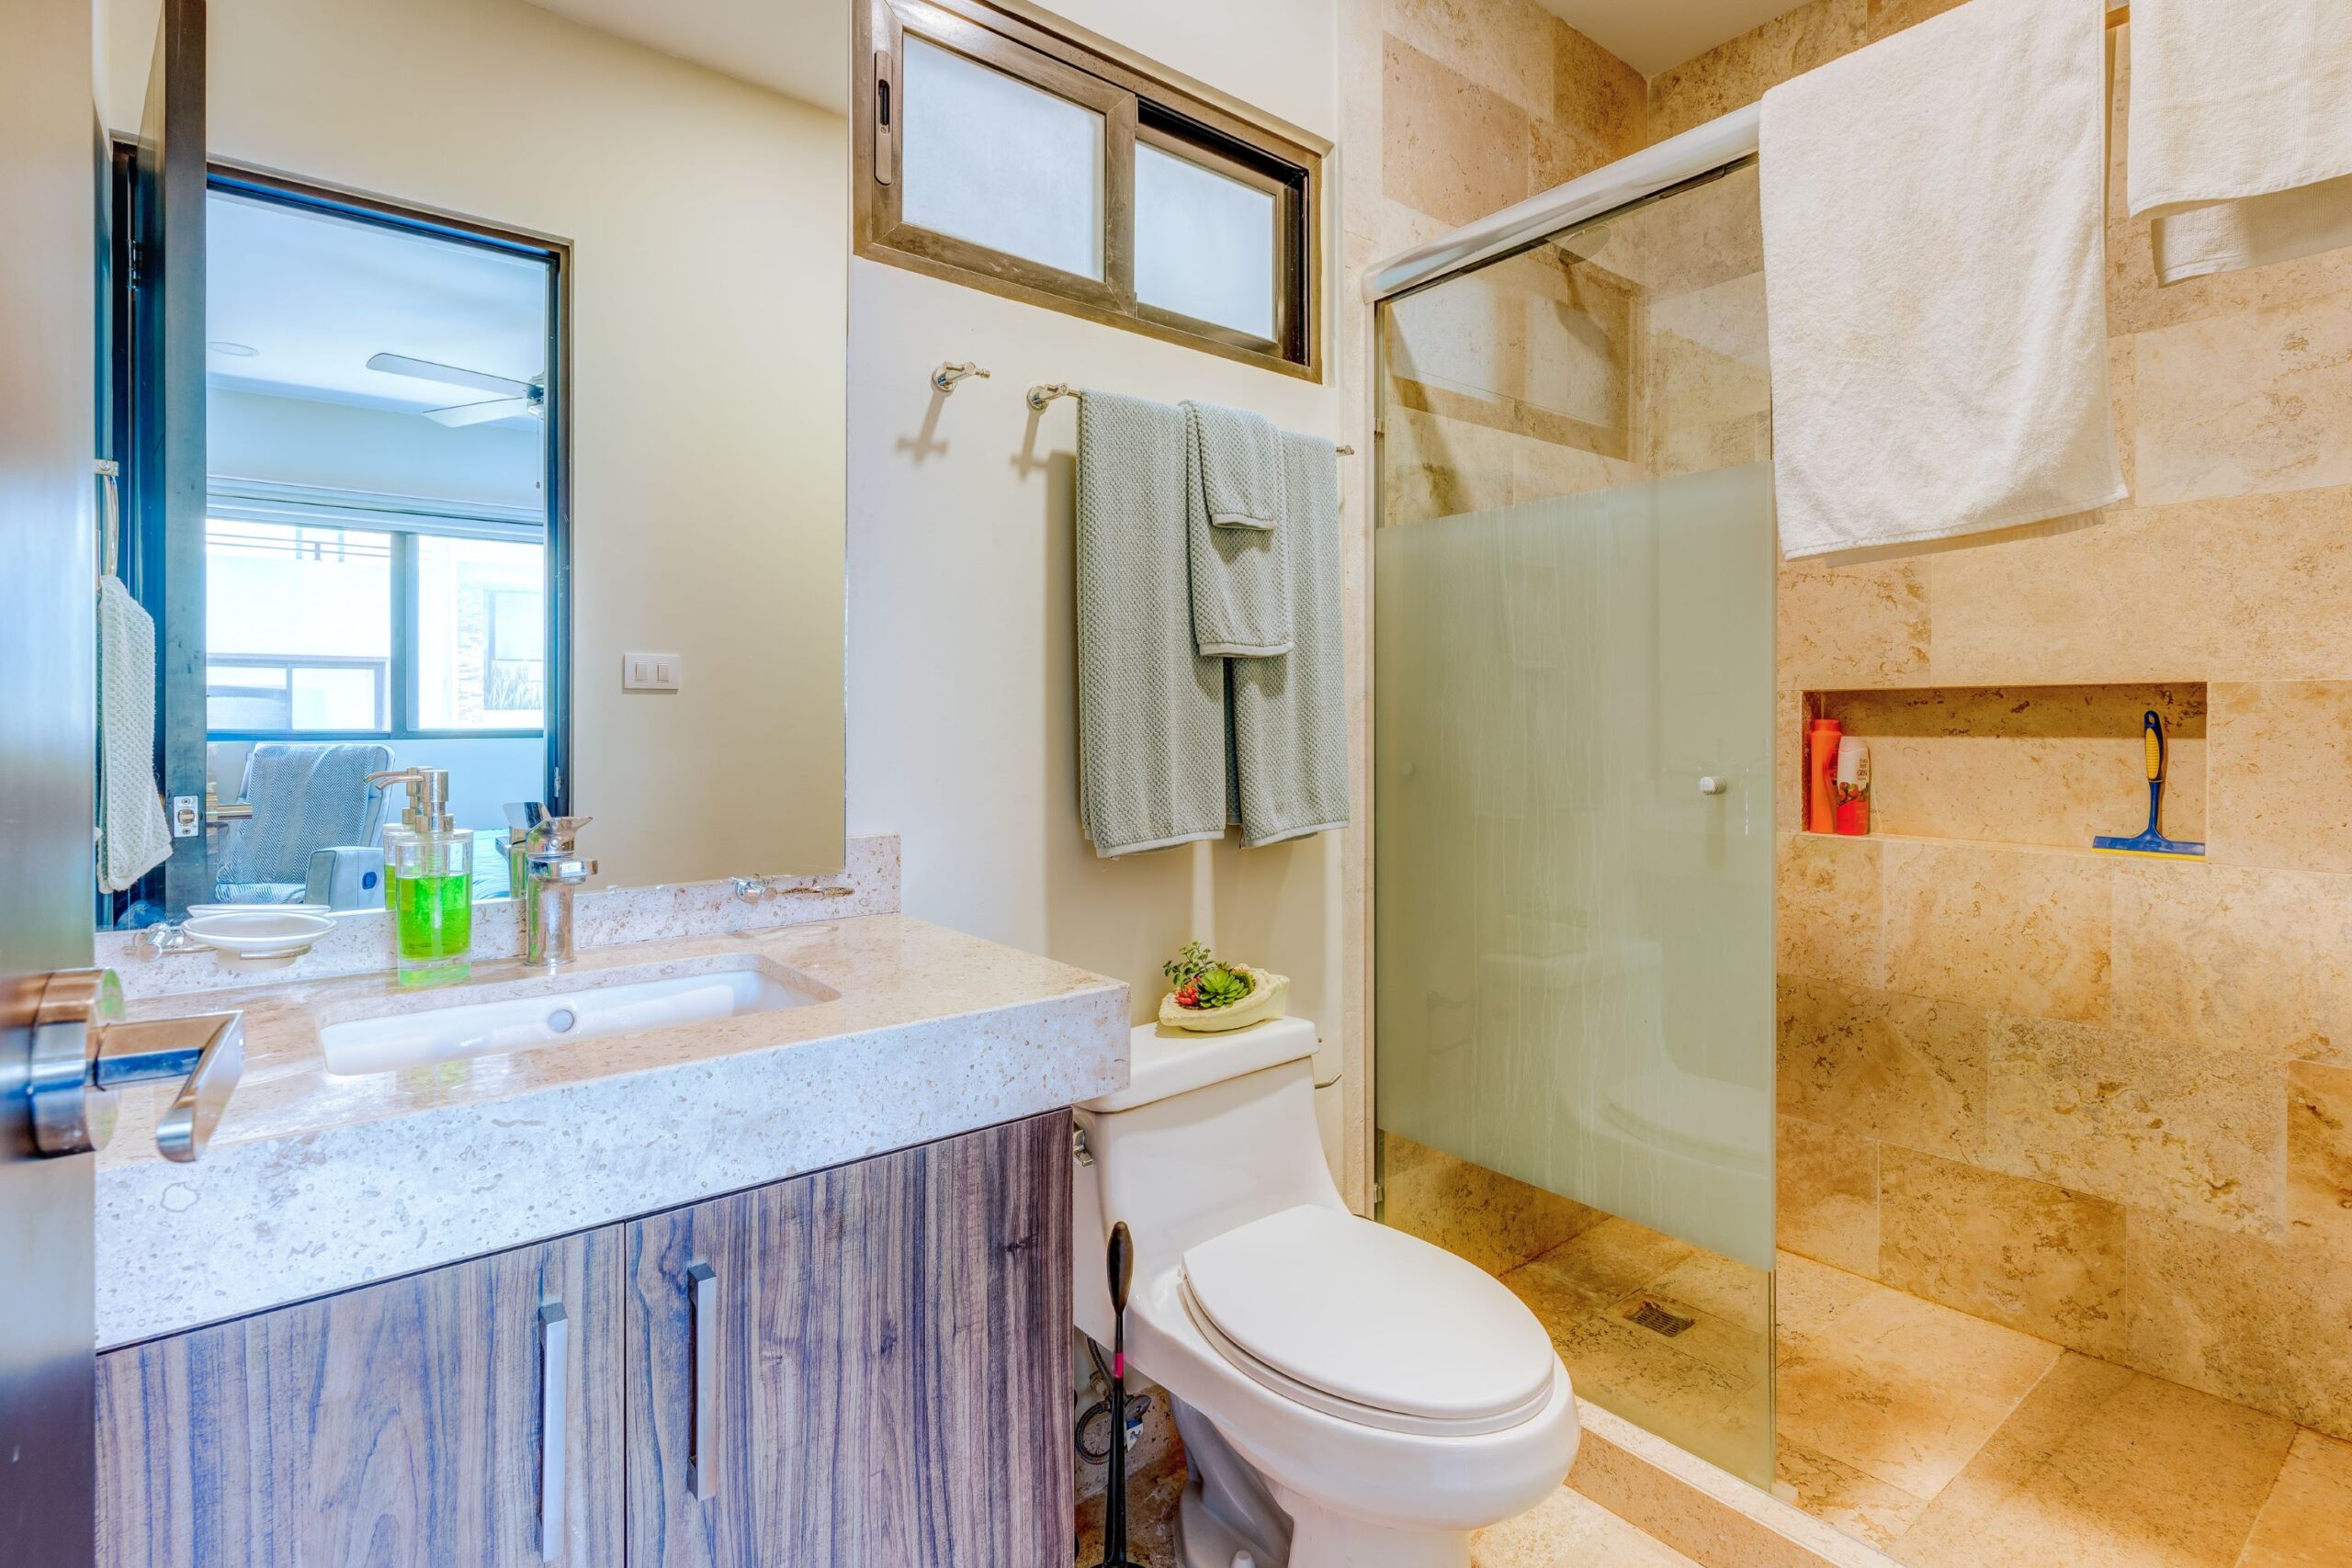 k playa del carmen mexico real estate penthouse arenis bathroom and shower